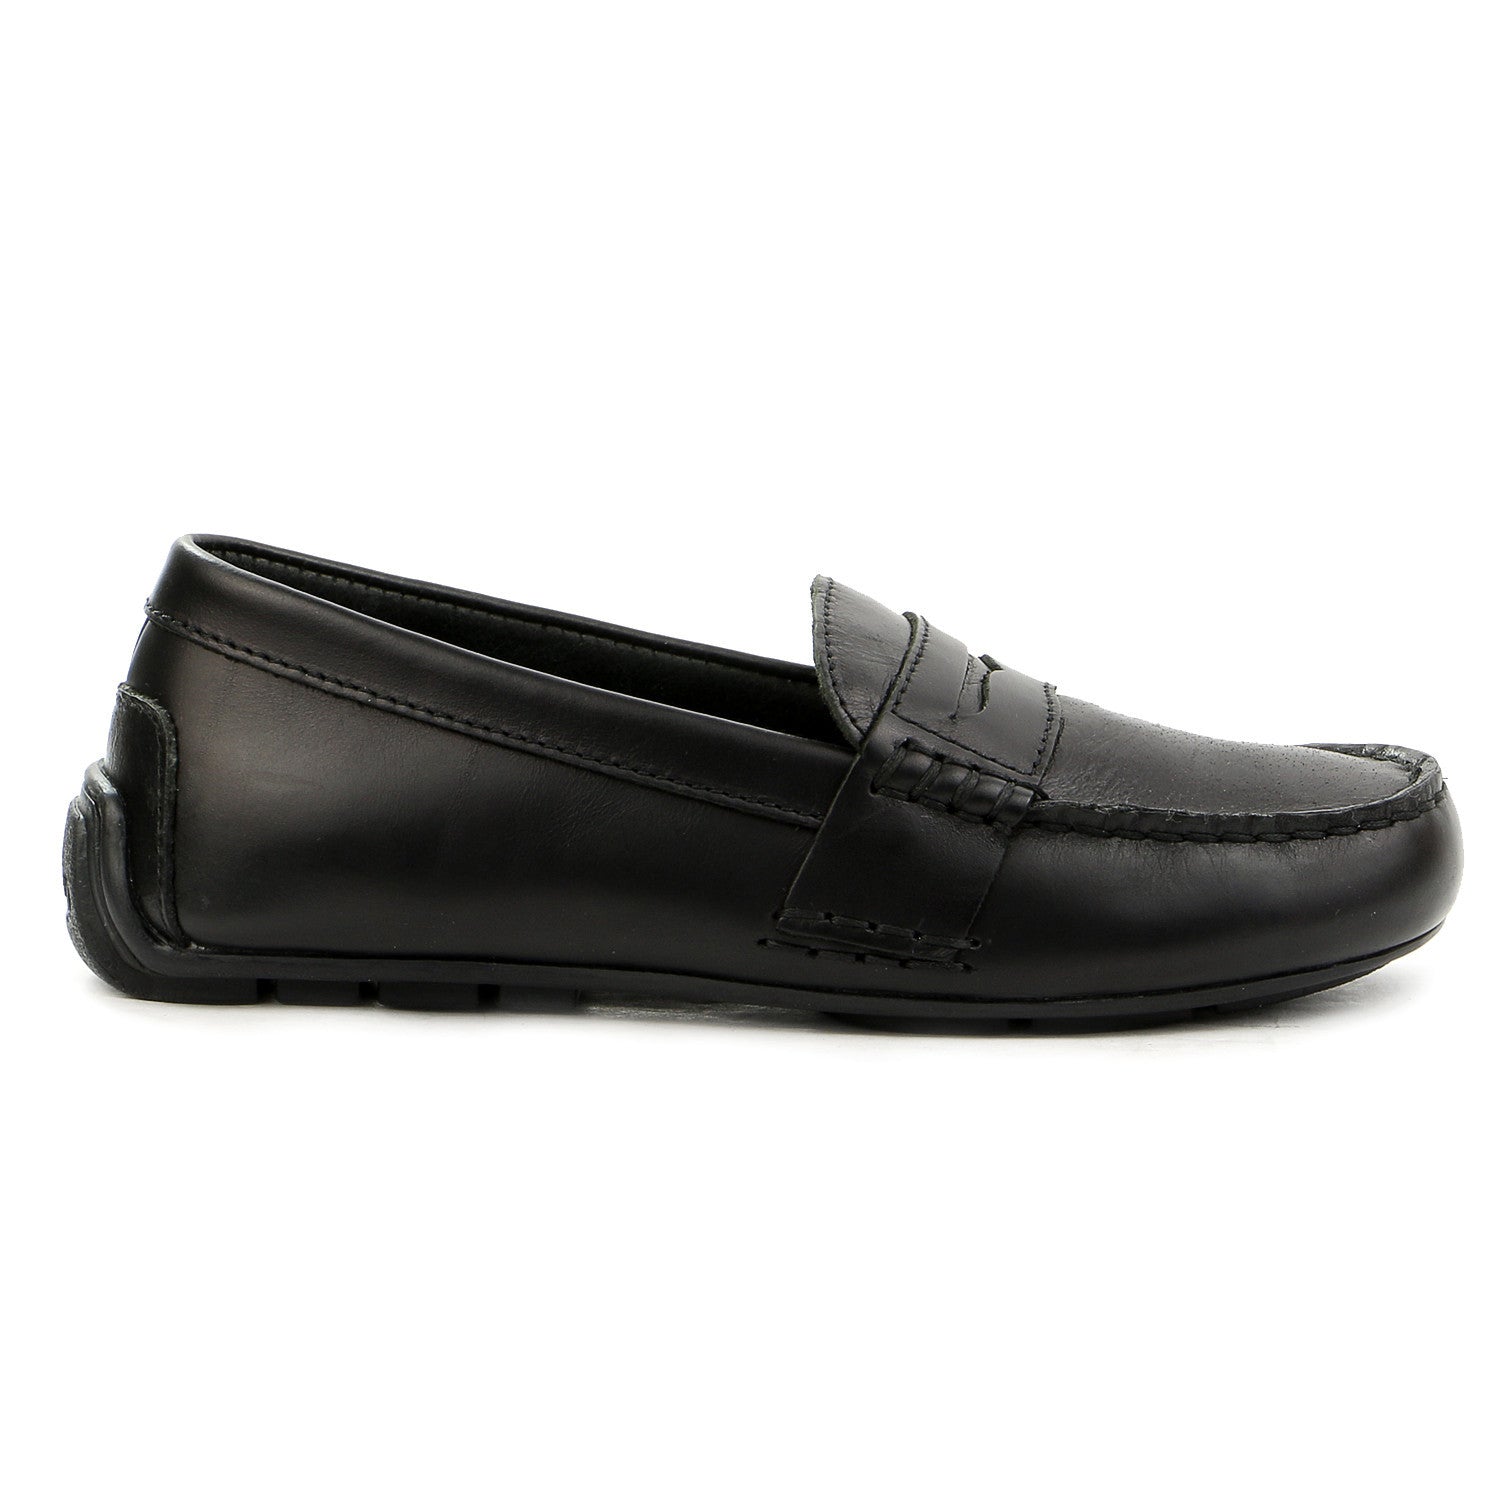 Ralph Lauren Telly Moccasin Loafer Shoe 